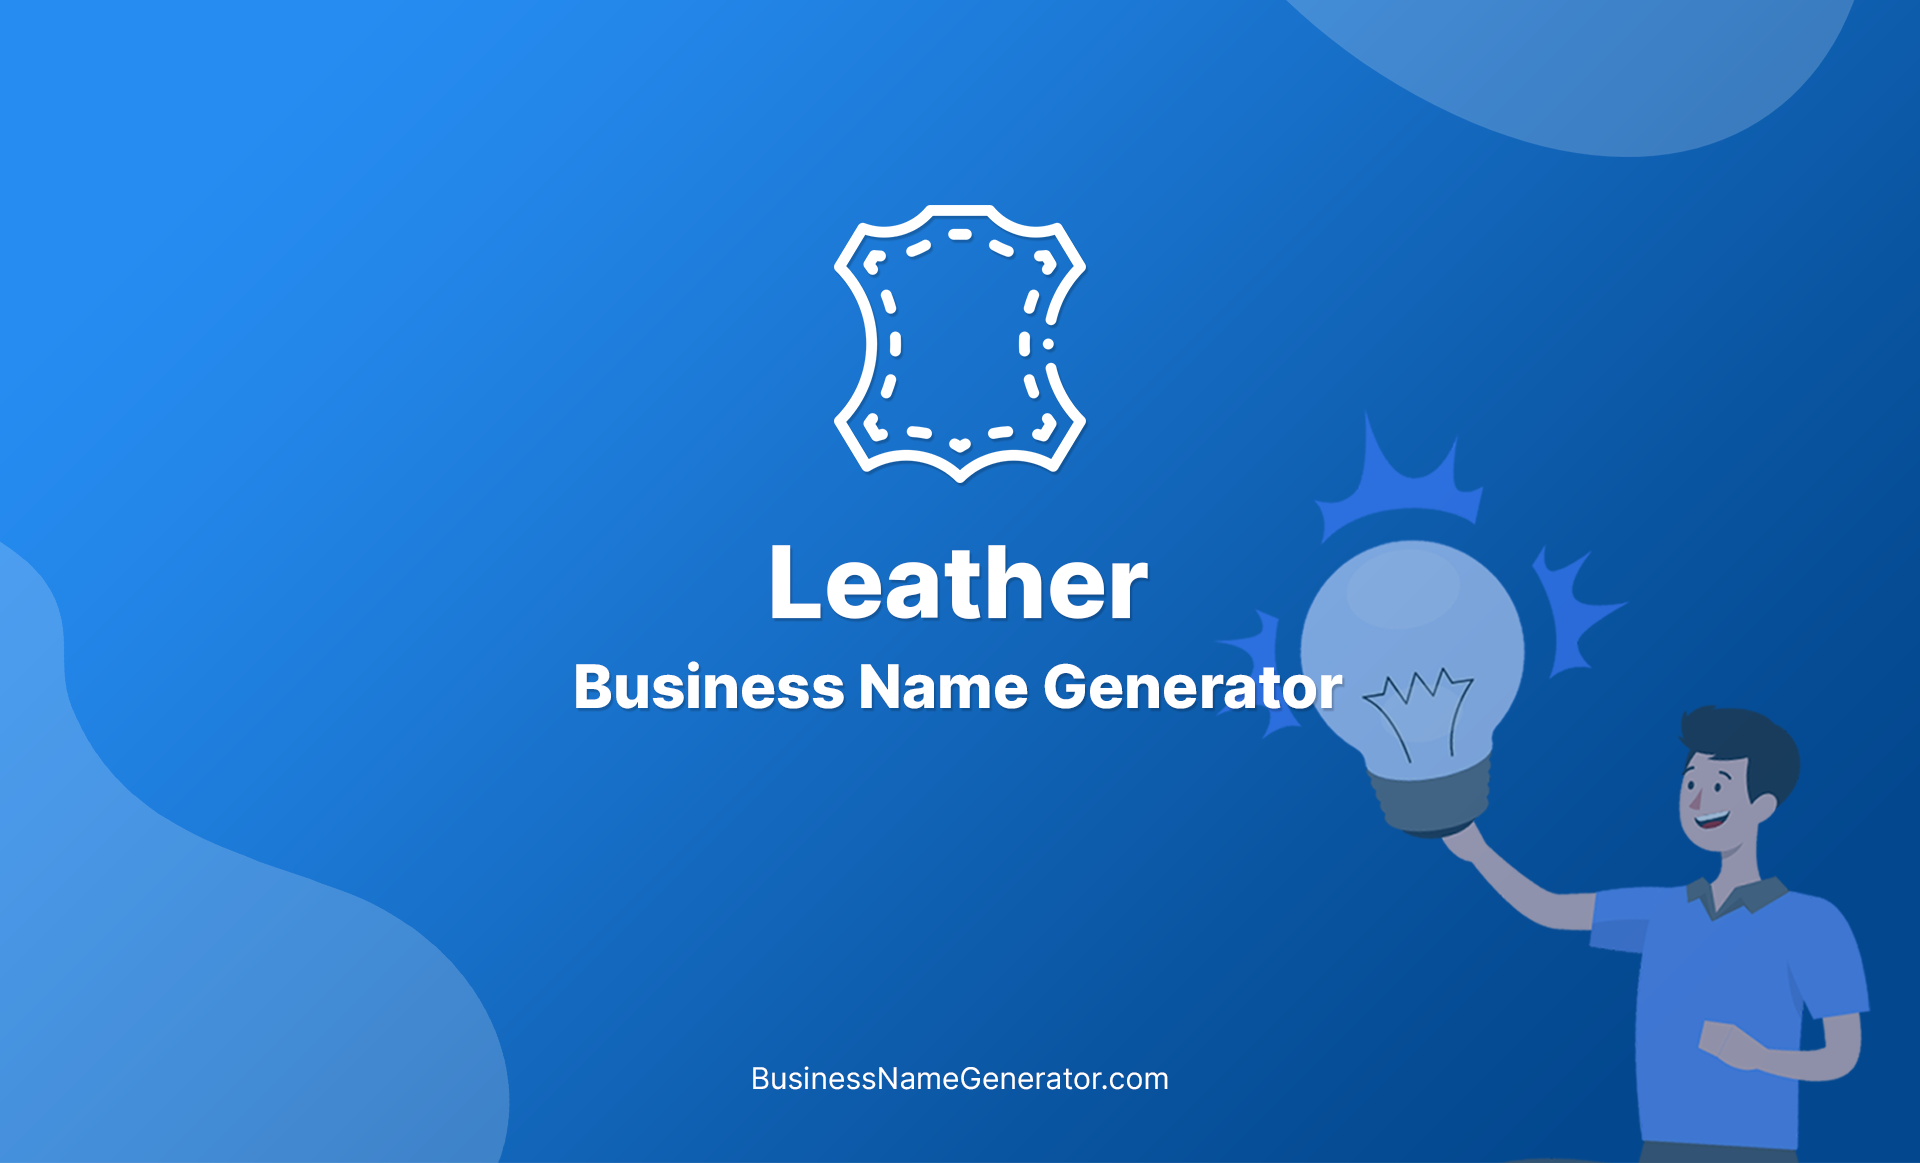 Leather Business Name Generator